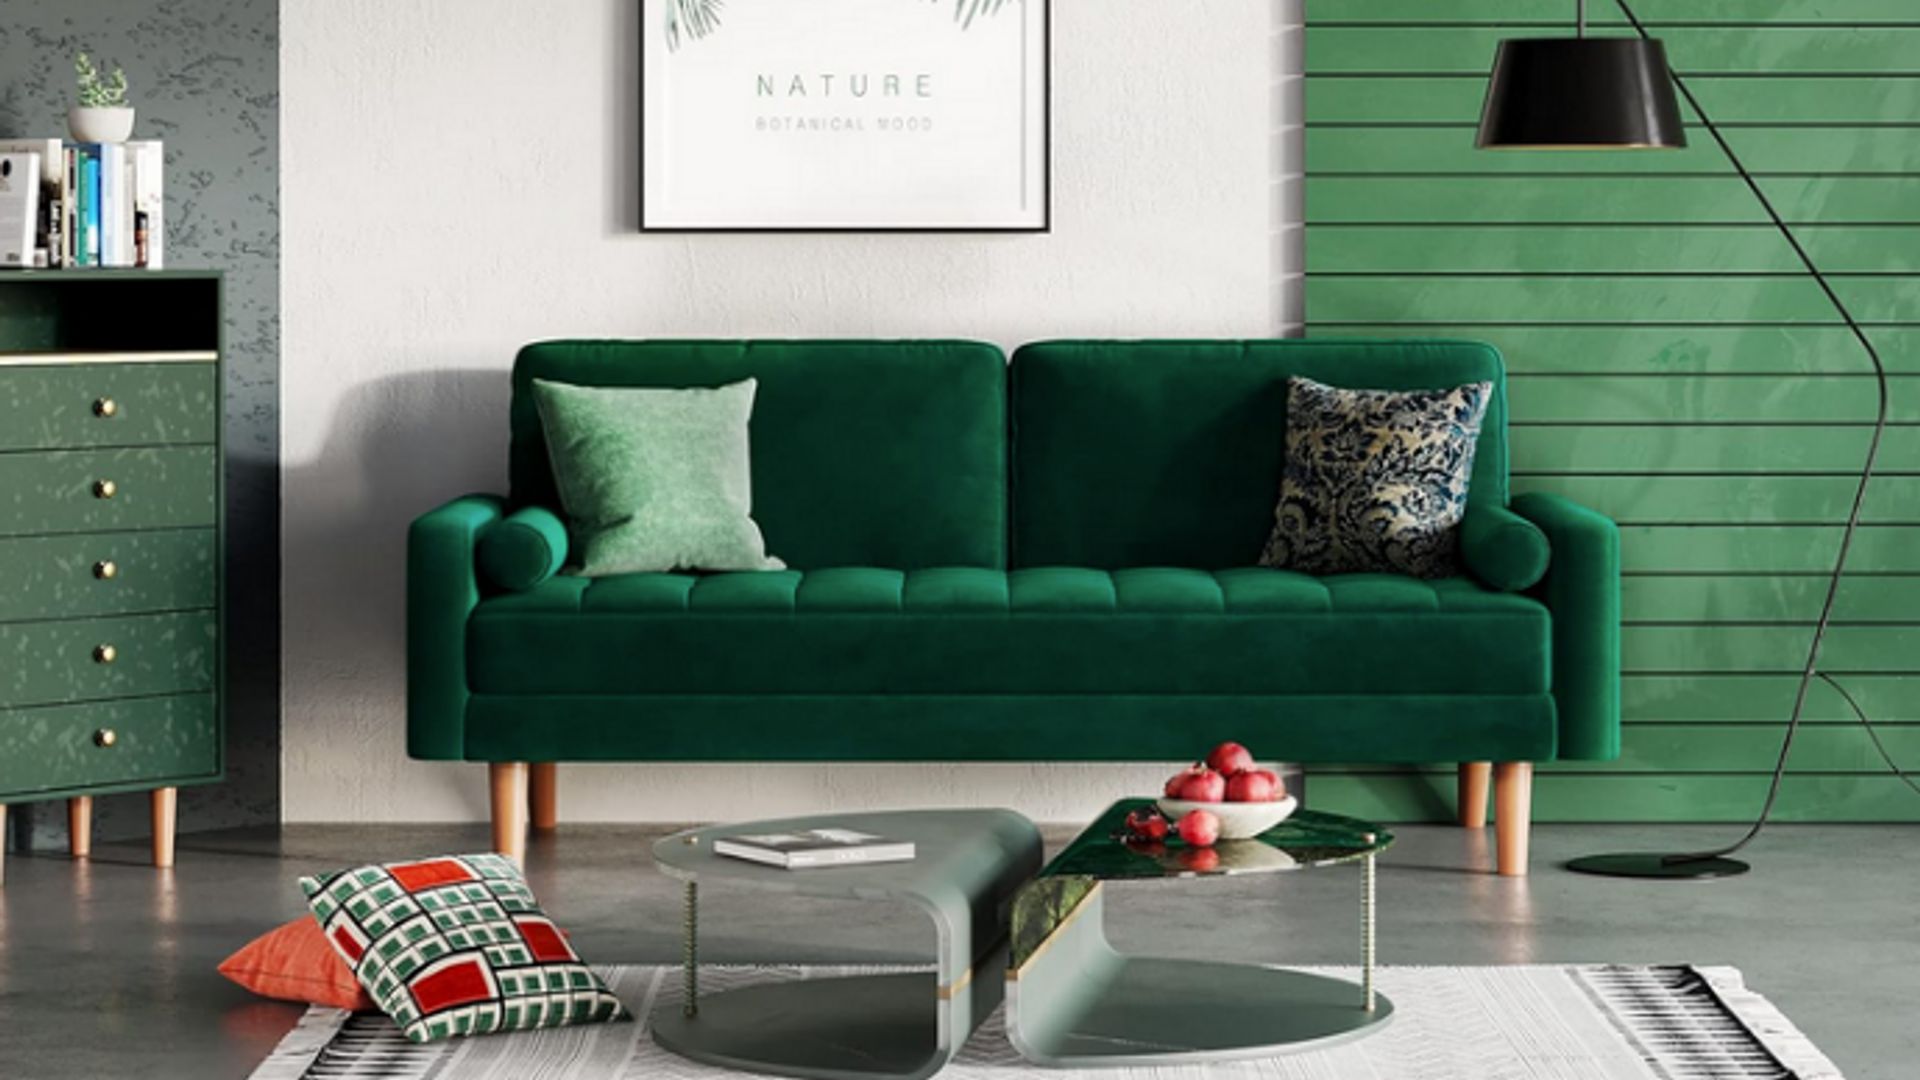 6 Affordable Furniture Brands That Offer Quality and Value - The Manual